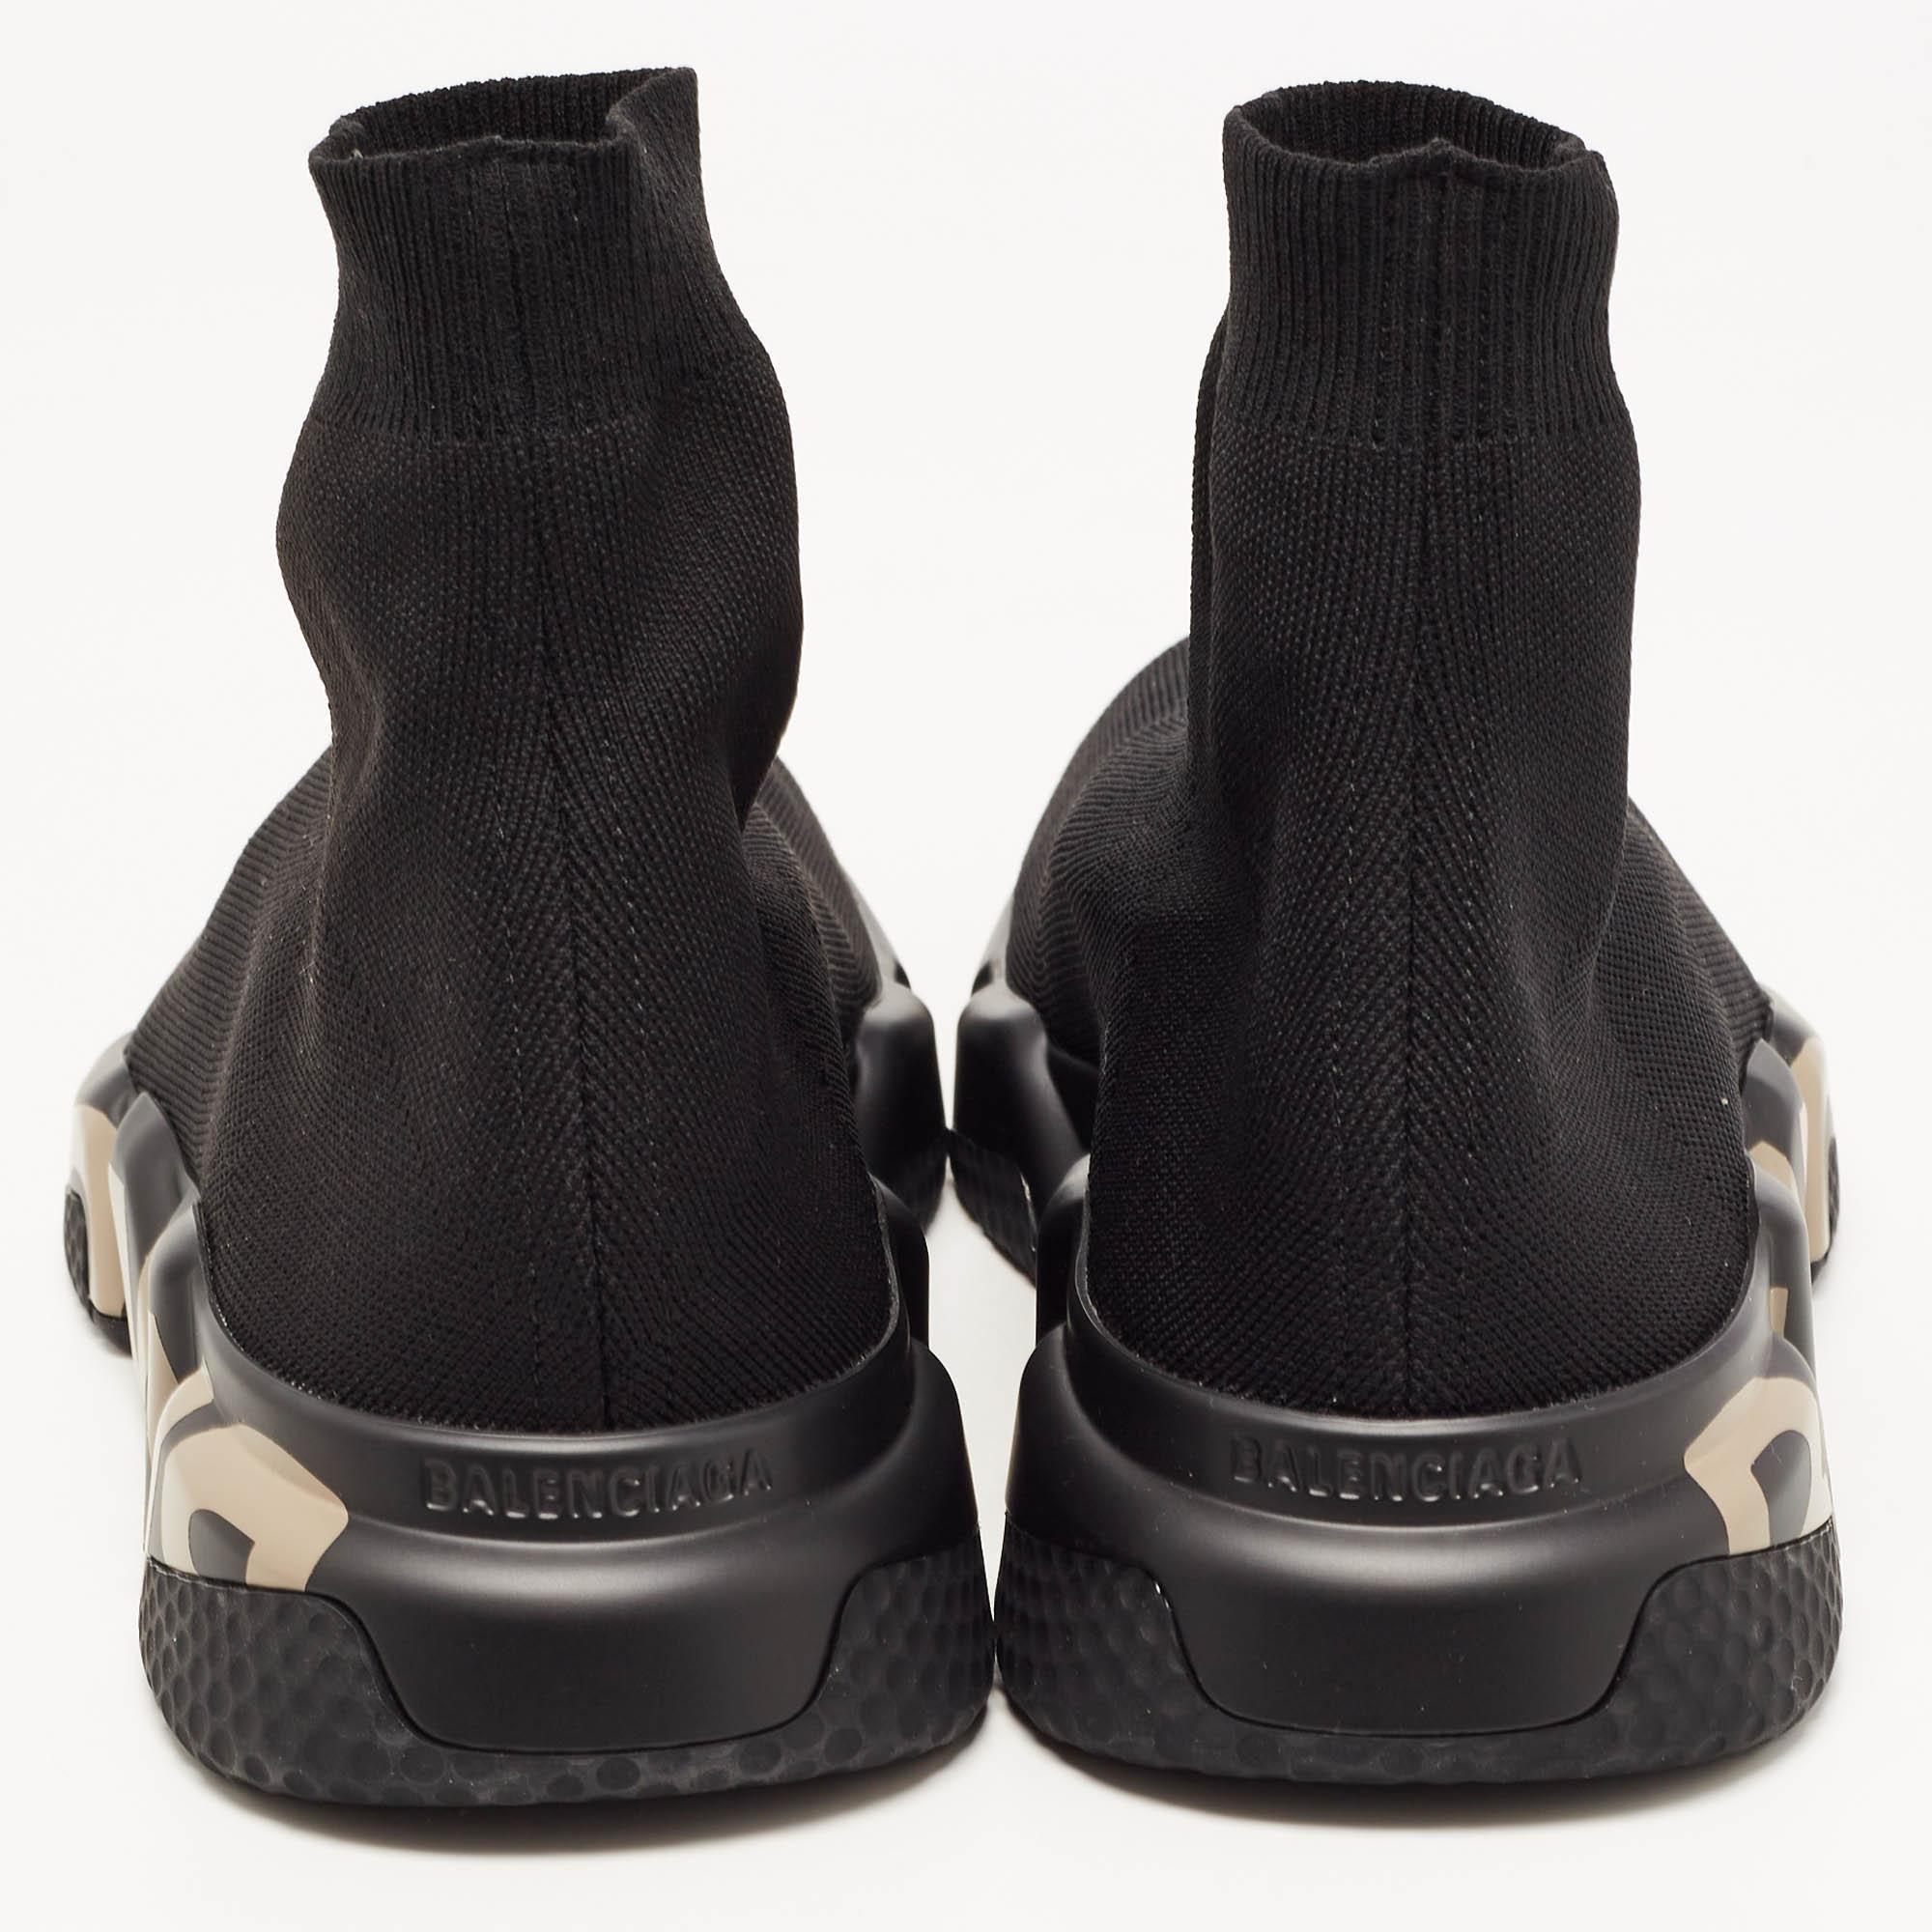 Let this comfortable pair be your first choice when you're out for a long day. These Balenciaga shoes have well-sewn uppers beautifully set on durable soles.

Includes: Original Box, Info Booklet, Original Dustbag